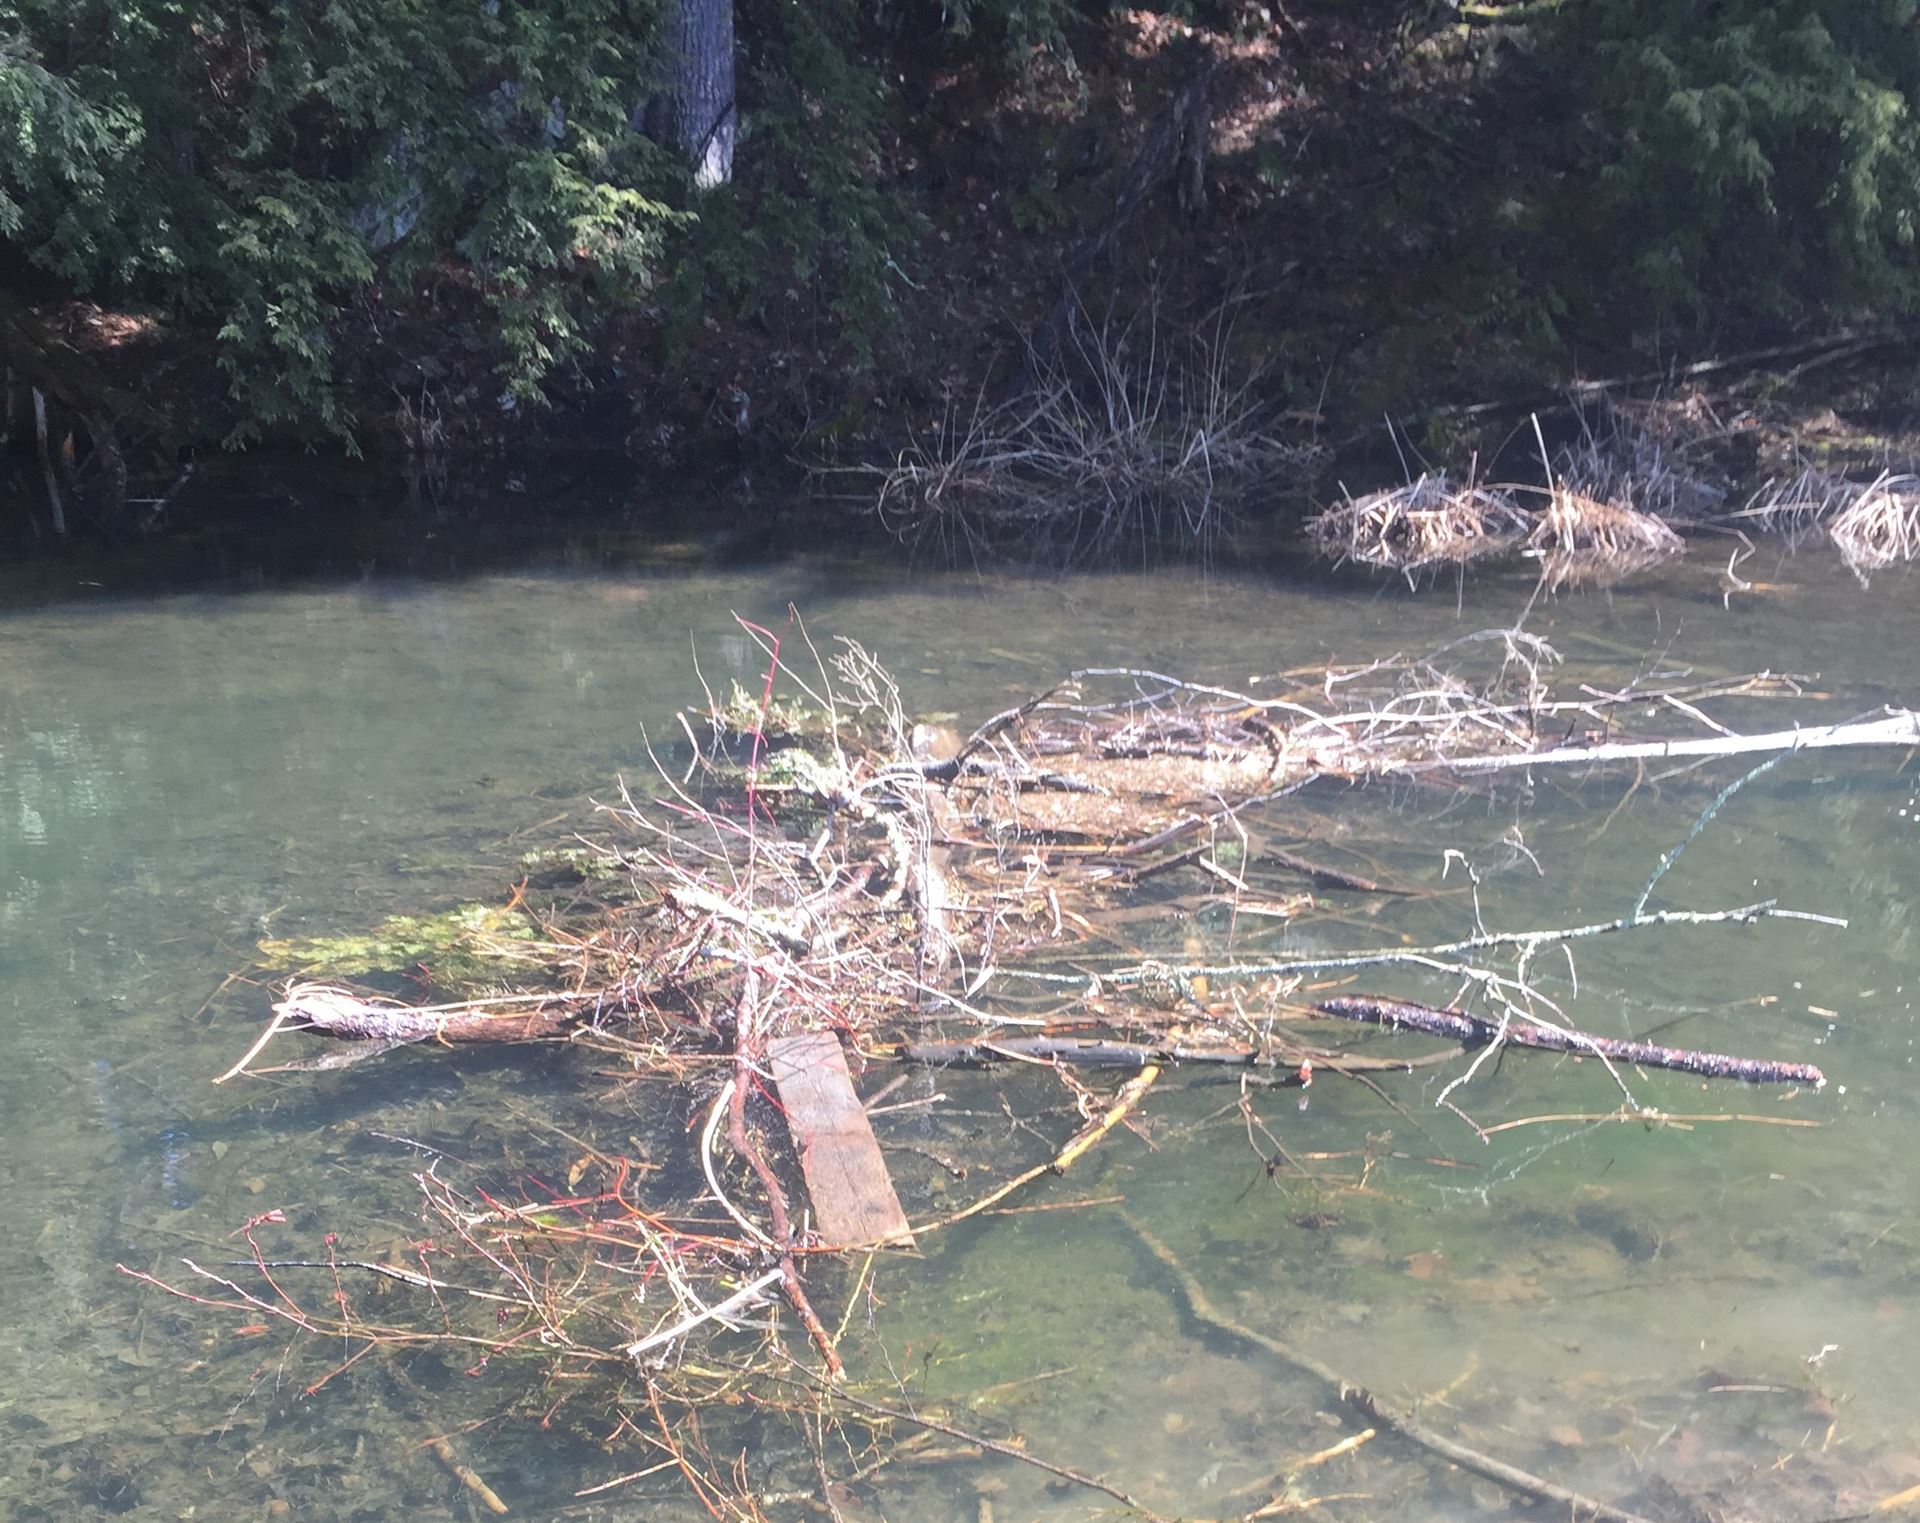 Debris in the Lily Pond Channel